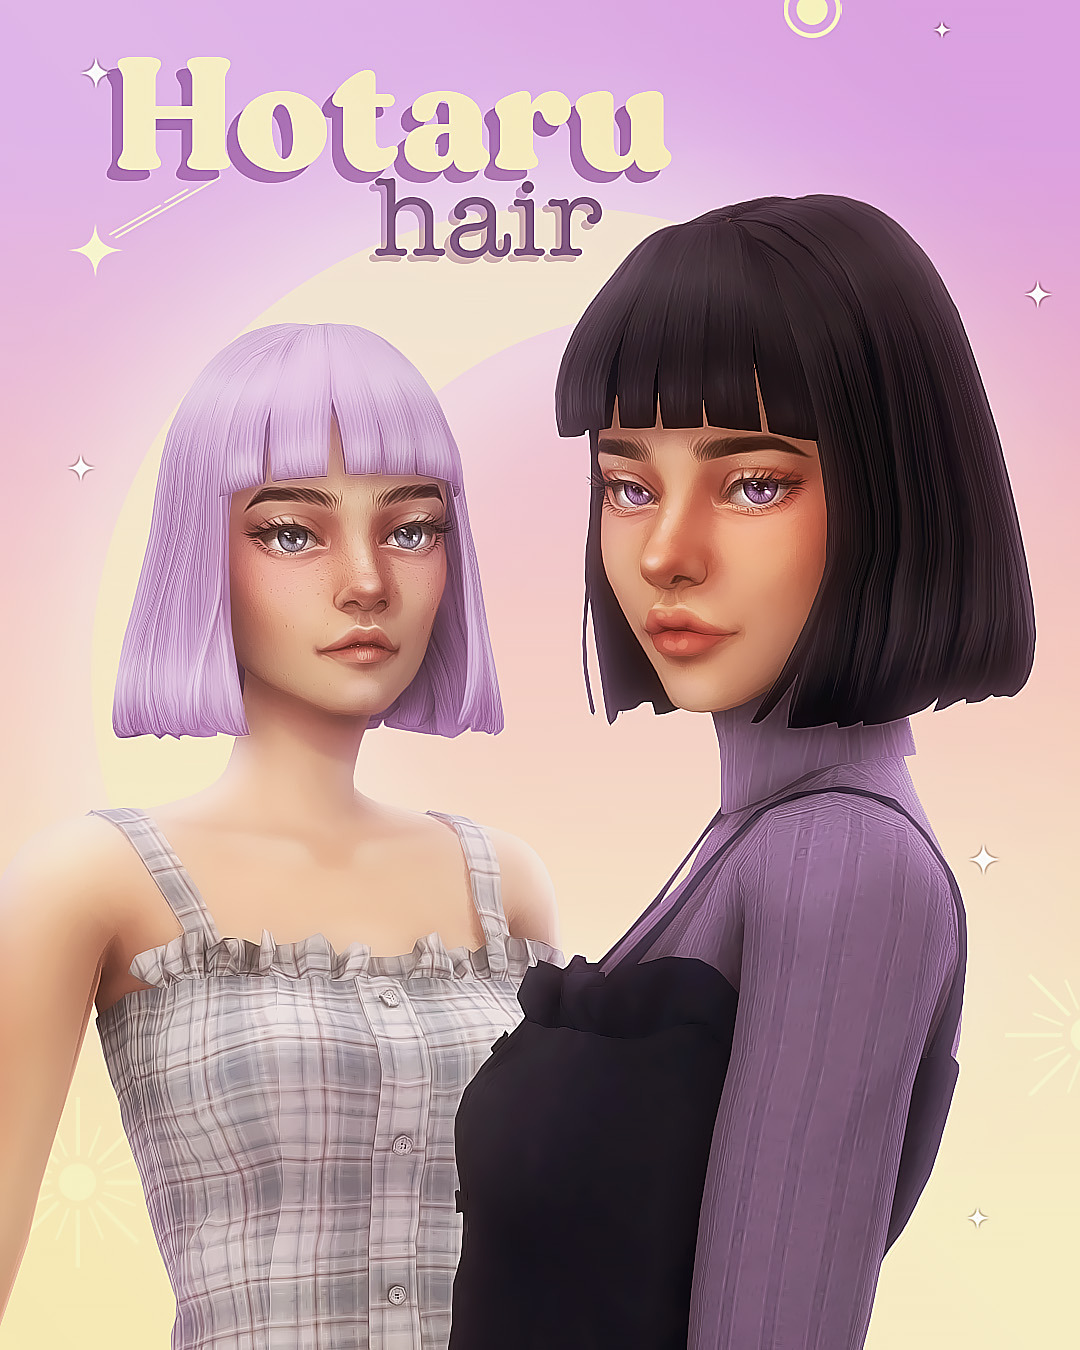 Hotaru hair Hello! I’m having such a good time making CC for Sailor Month (ʃƪ´ᴗ`;) This hair was inspired by darling Hotaru Tomoe aka Sailor Saturn 🖤💜 • The Sims 4 • Base-game compatible • Compatible with hats • 18 EA swatches + 3 bonus colors •...